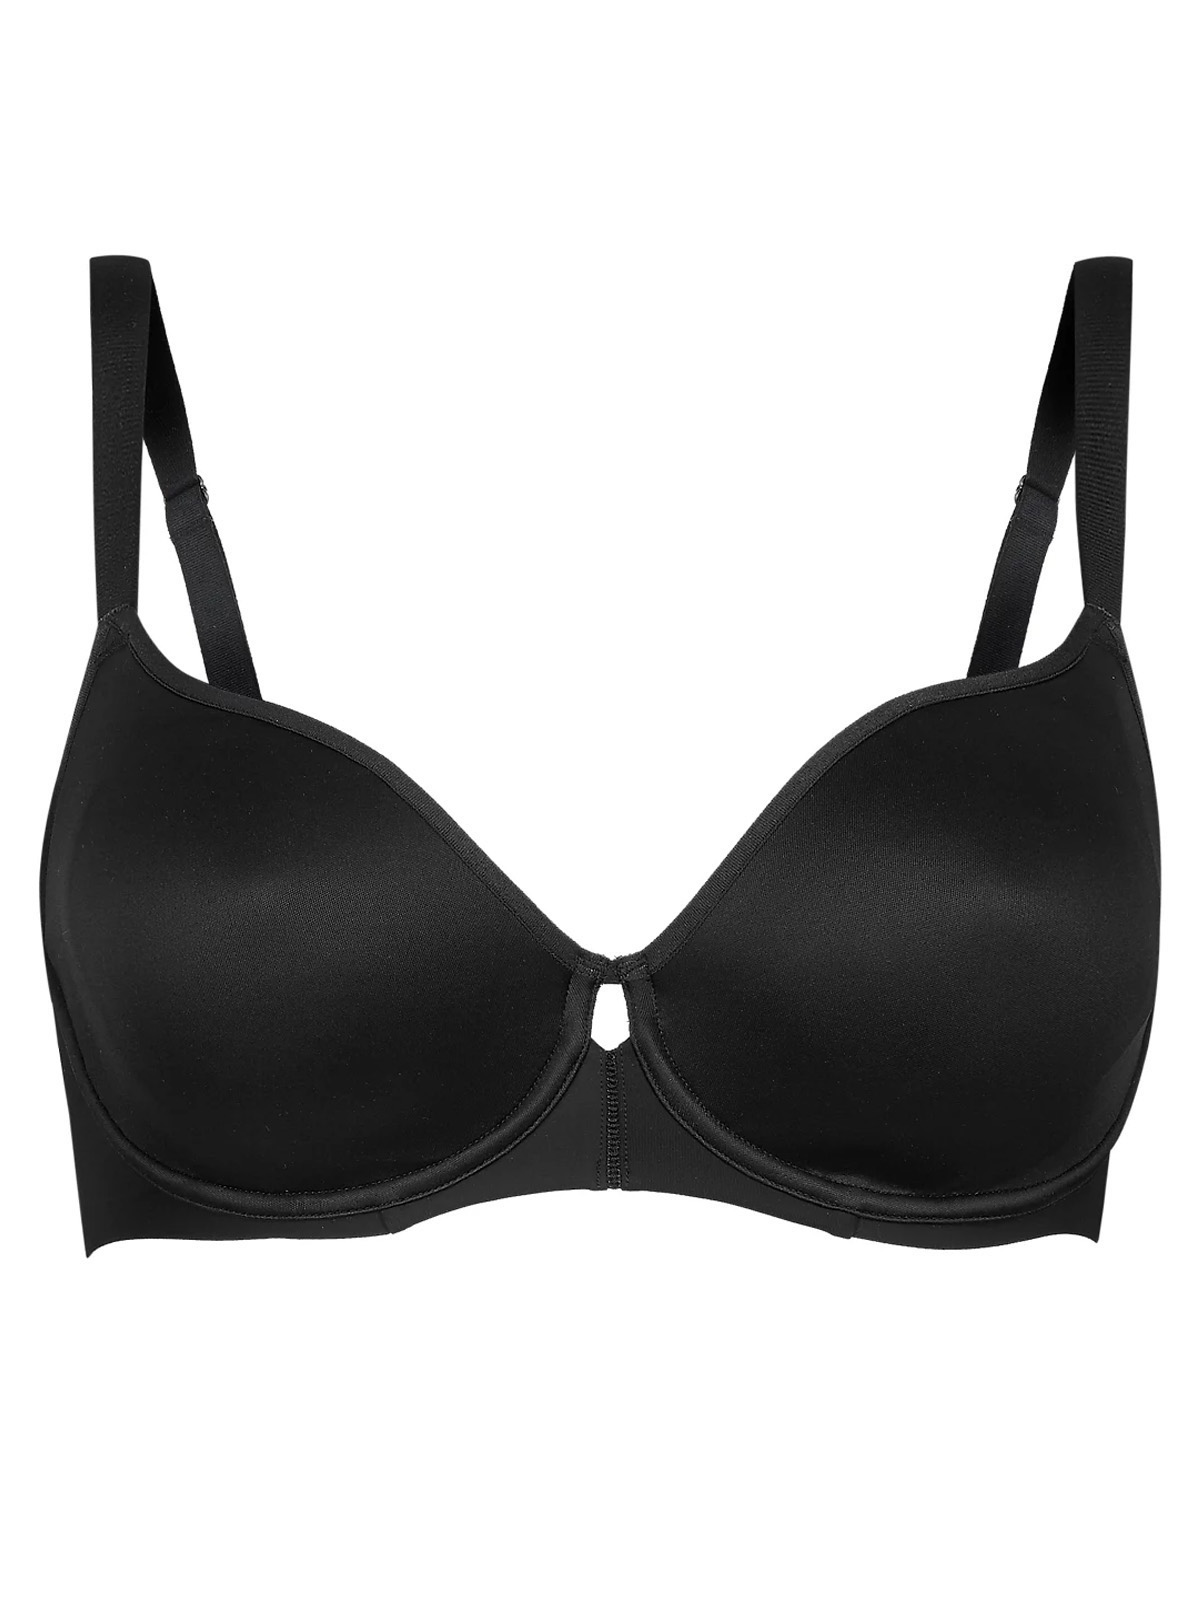 Marks and Spencer - - M&5 ASSORTED Full Cup & Balcony Bras - Size 32 to ...